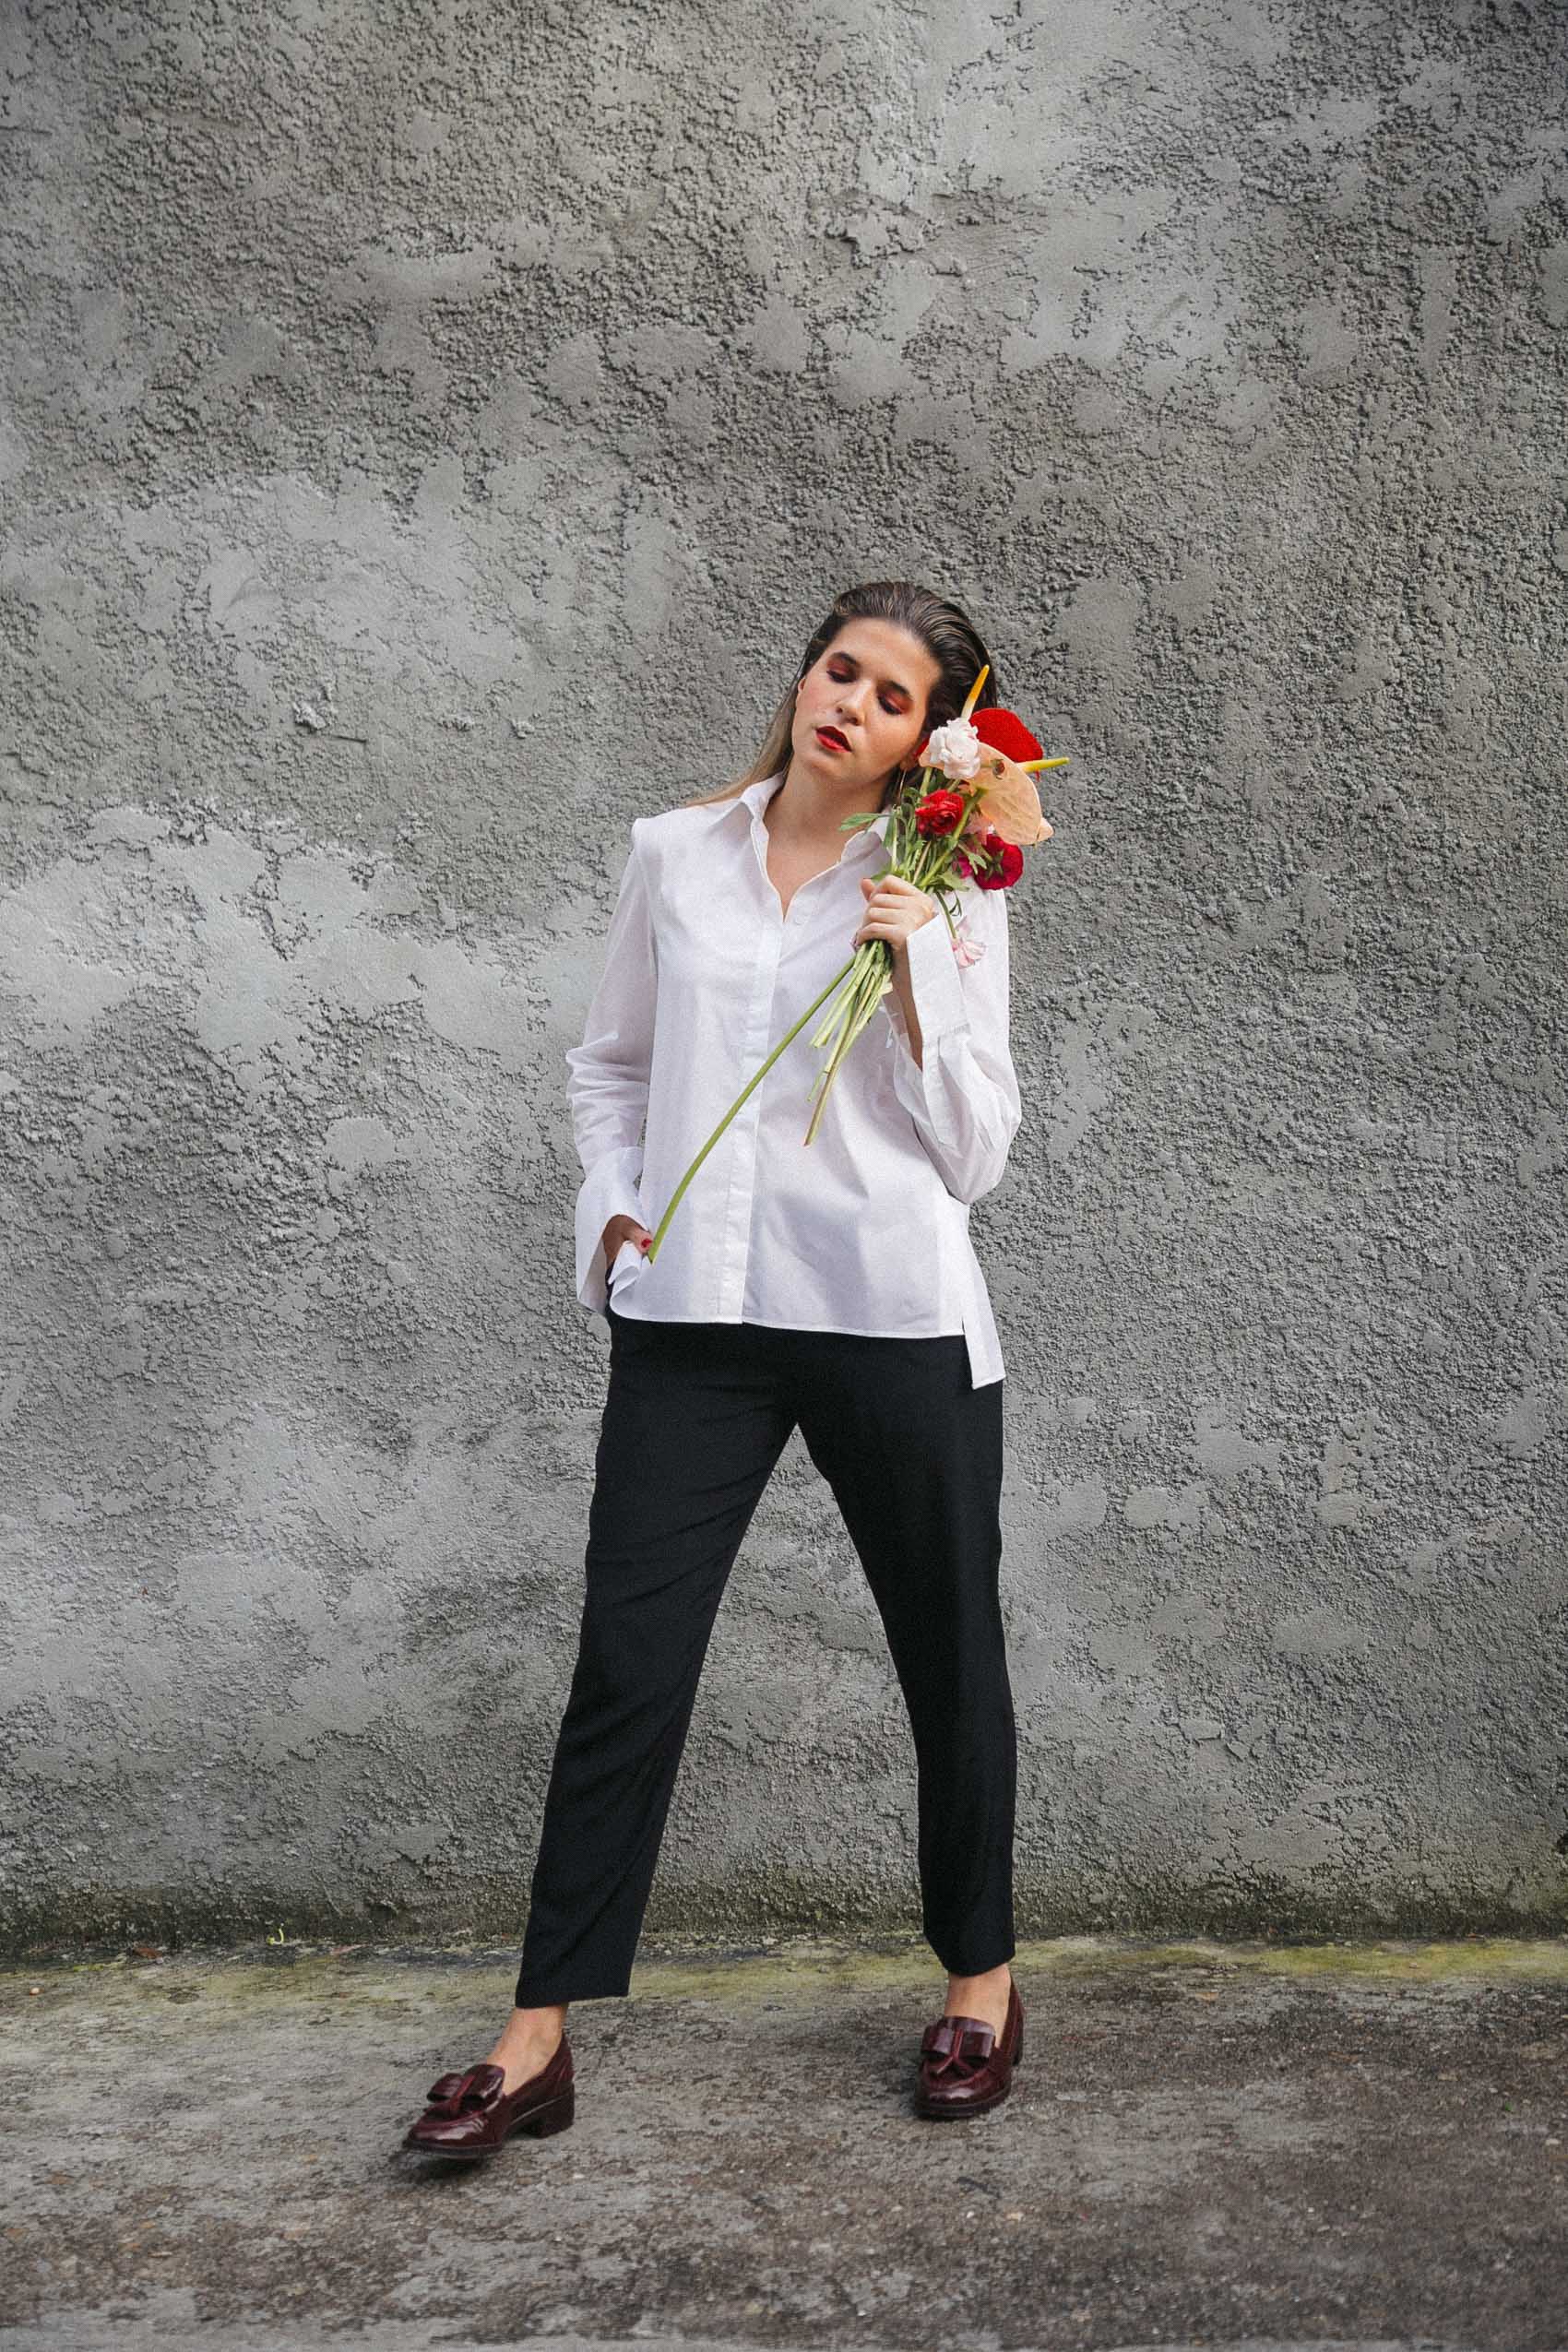 Maristella wearing Tory Burch loafers, black silk trousers and white button down shirt with side buttons